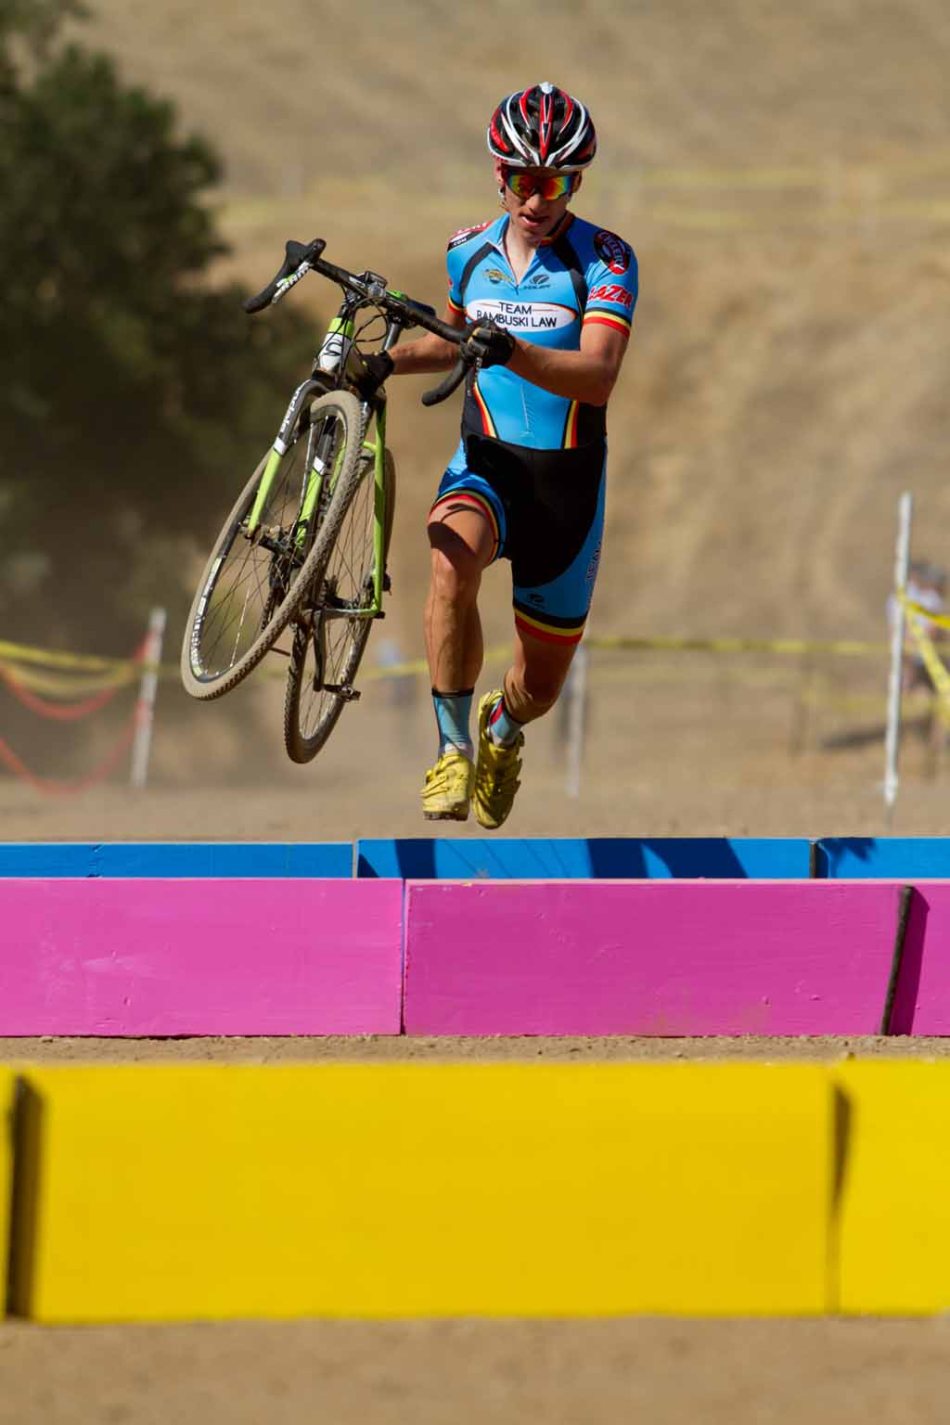 Team Rambuski Law Racer Keith Hillier and the Painted Plank-Barriers at San Jose Cougar (NCCX/SuprePro Racing)